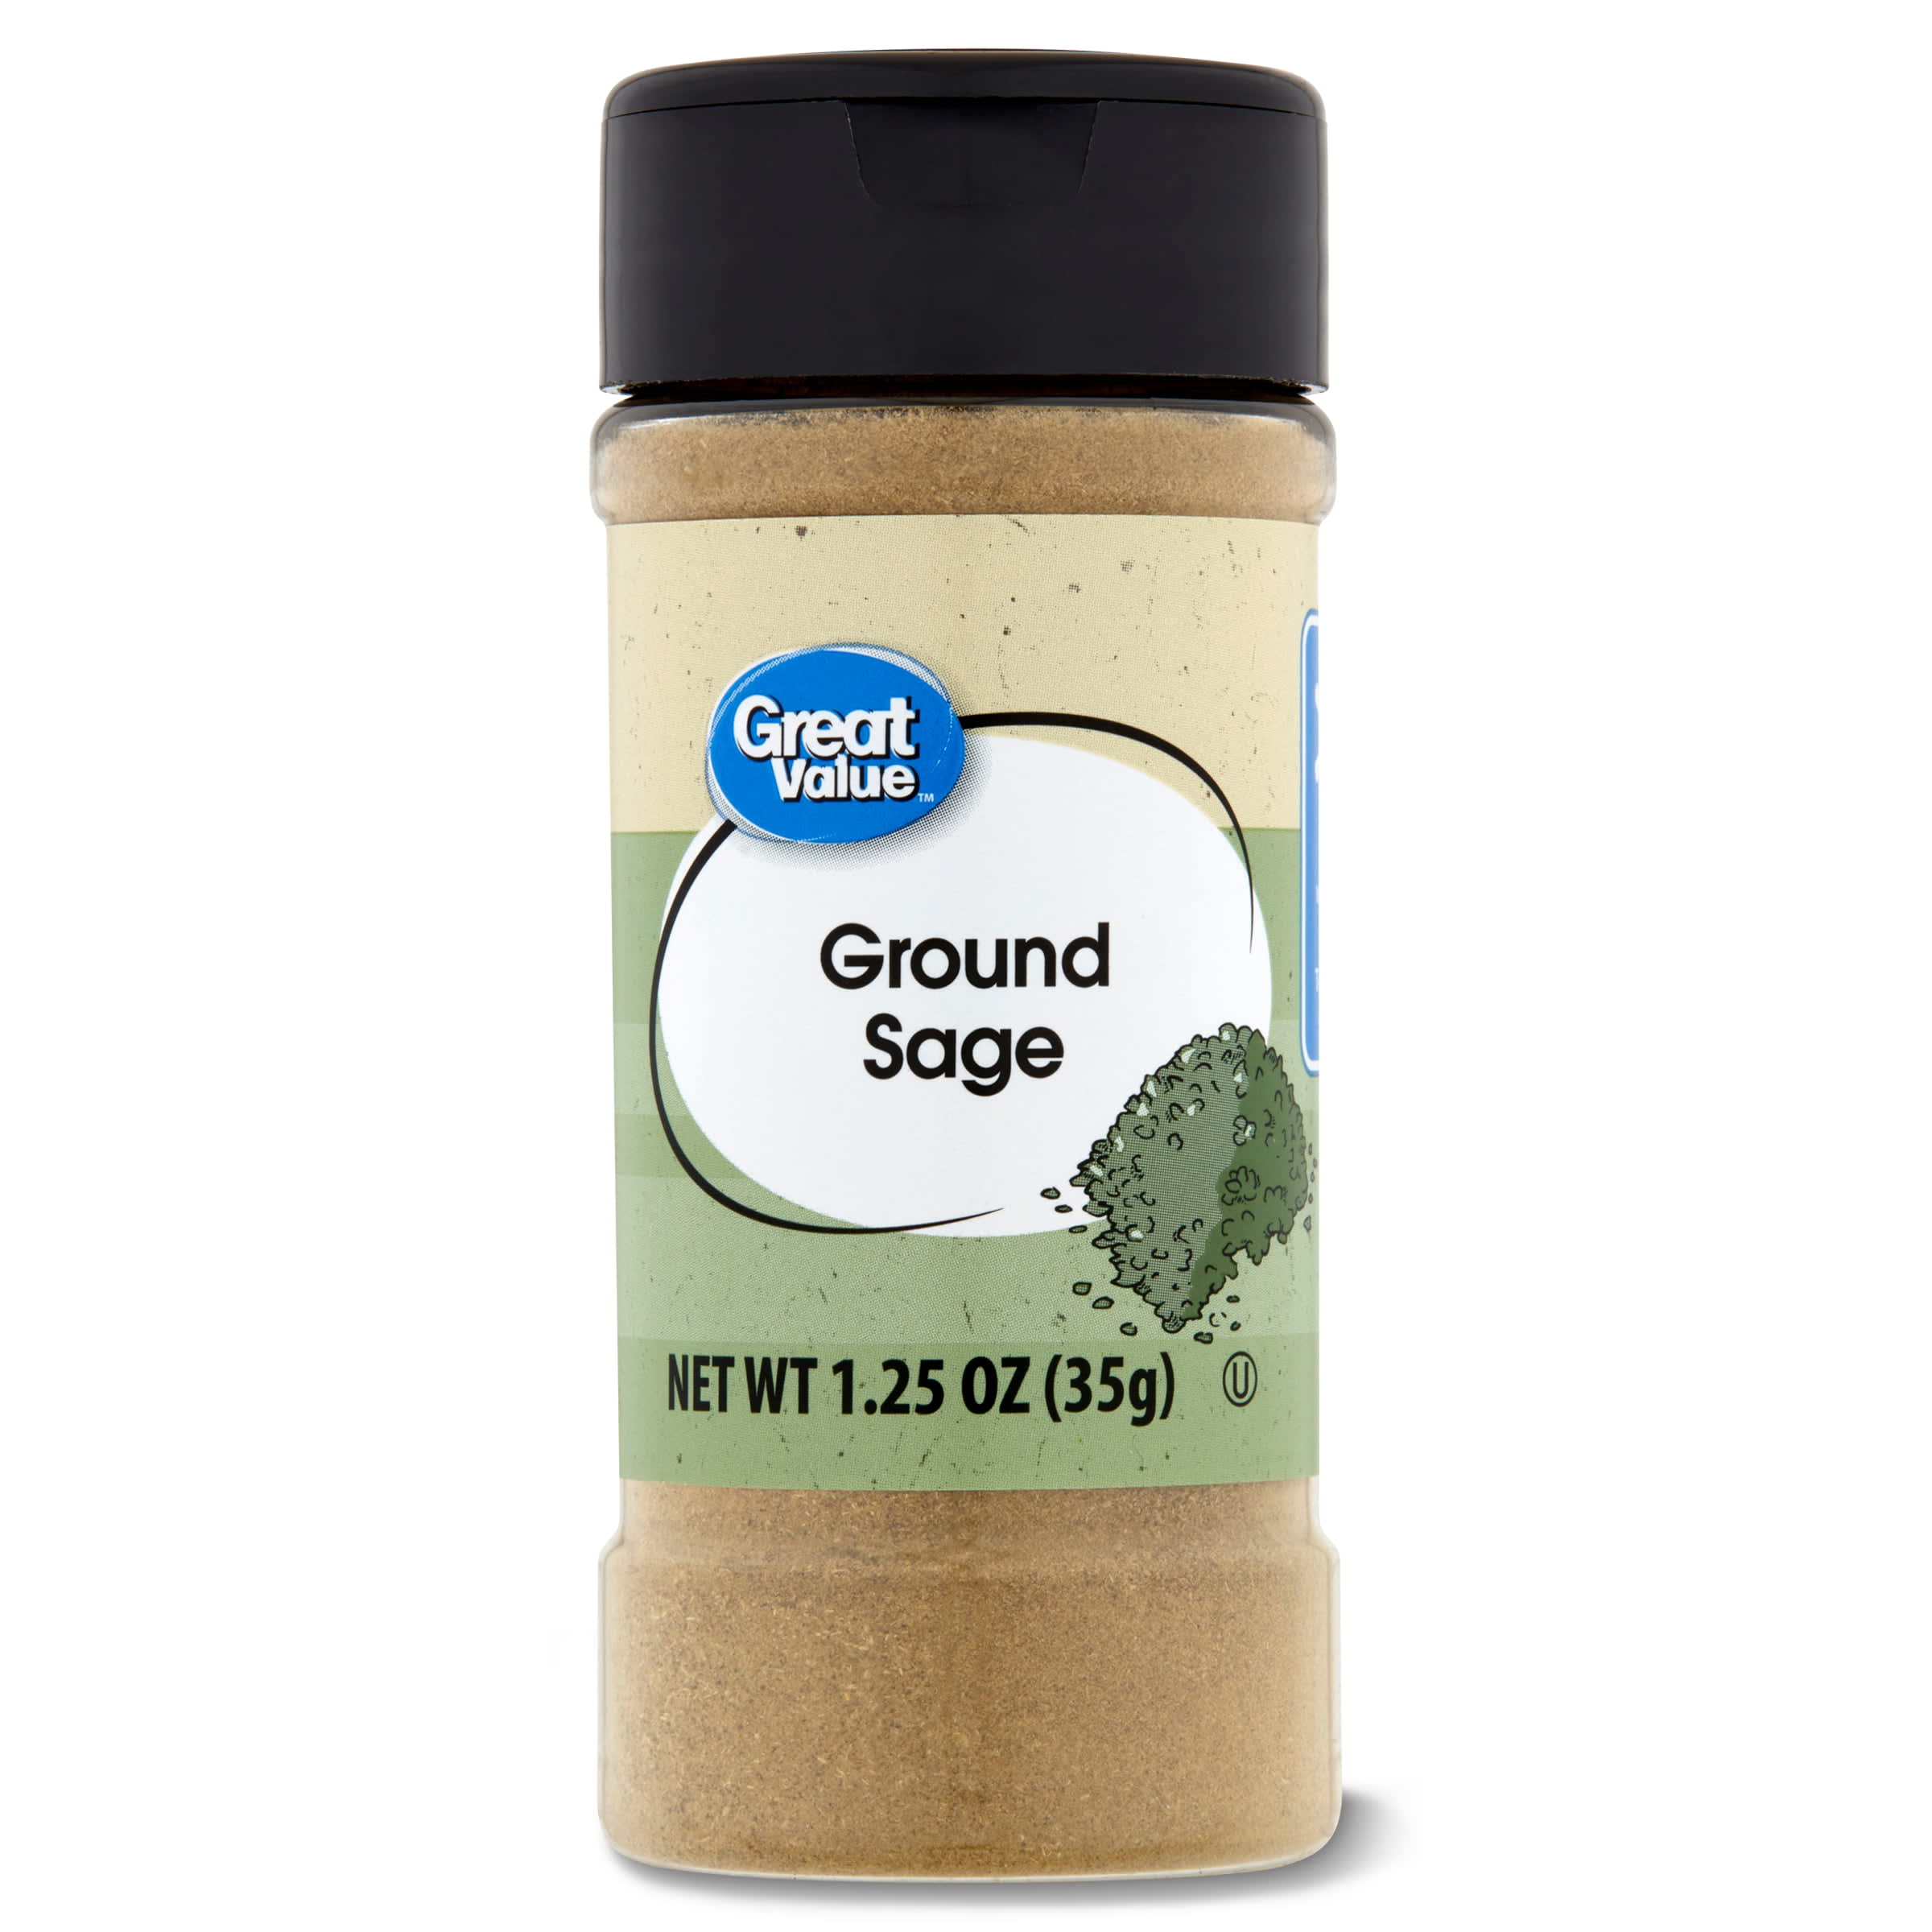 Great Value Ground Sage, 1.25 oz - DroneUp Delivery